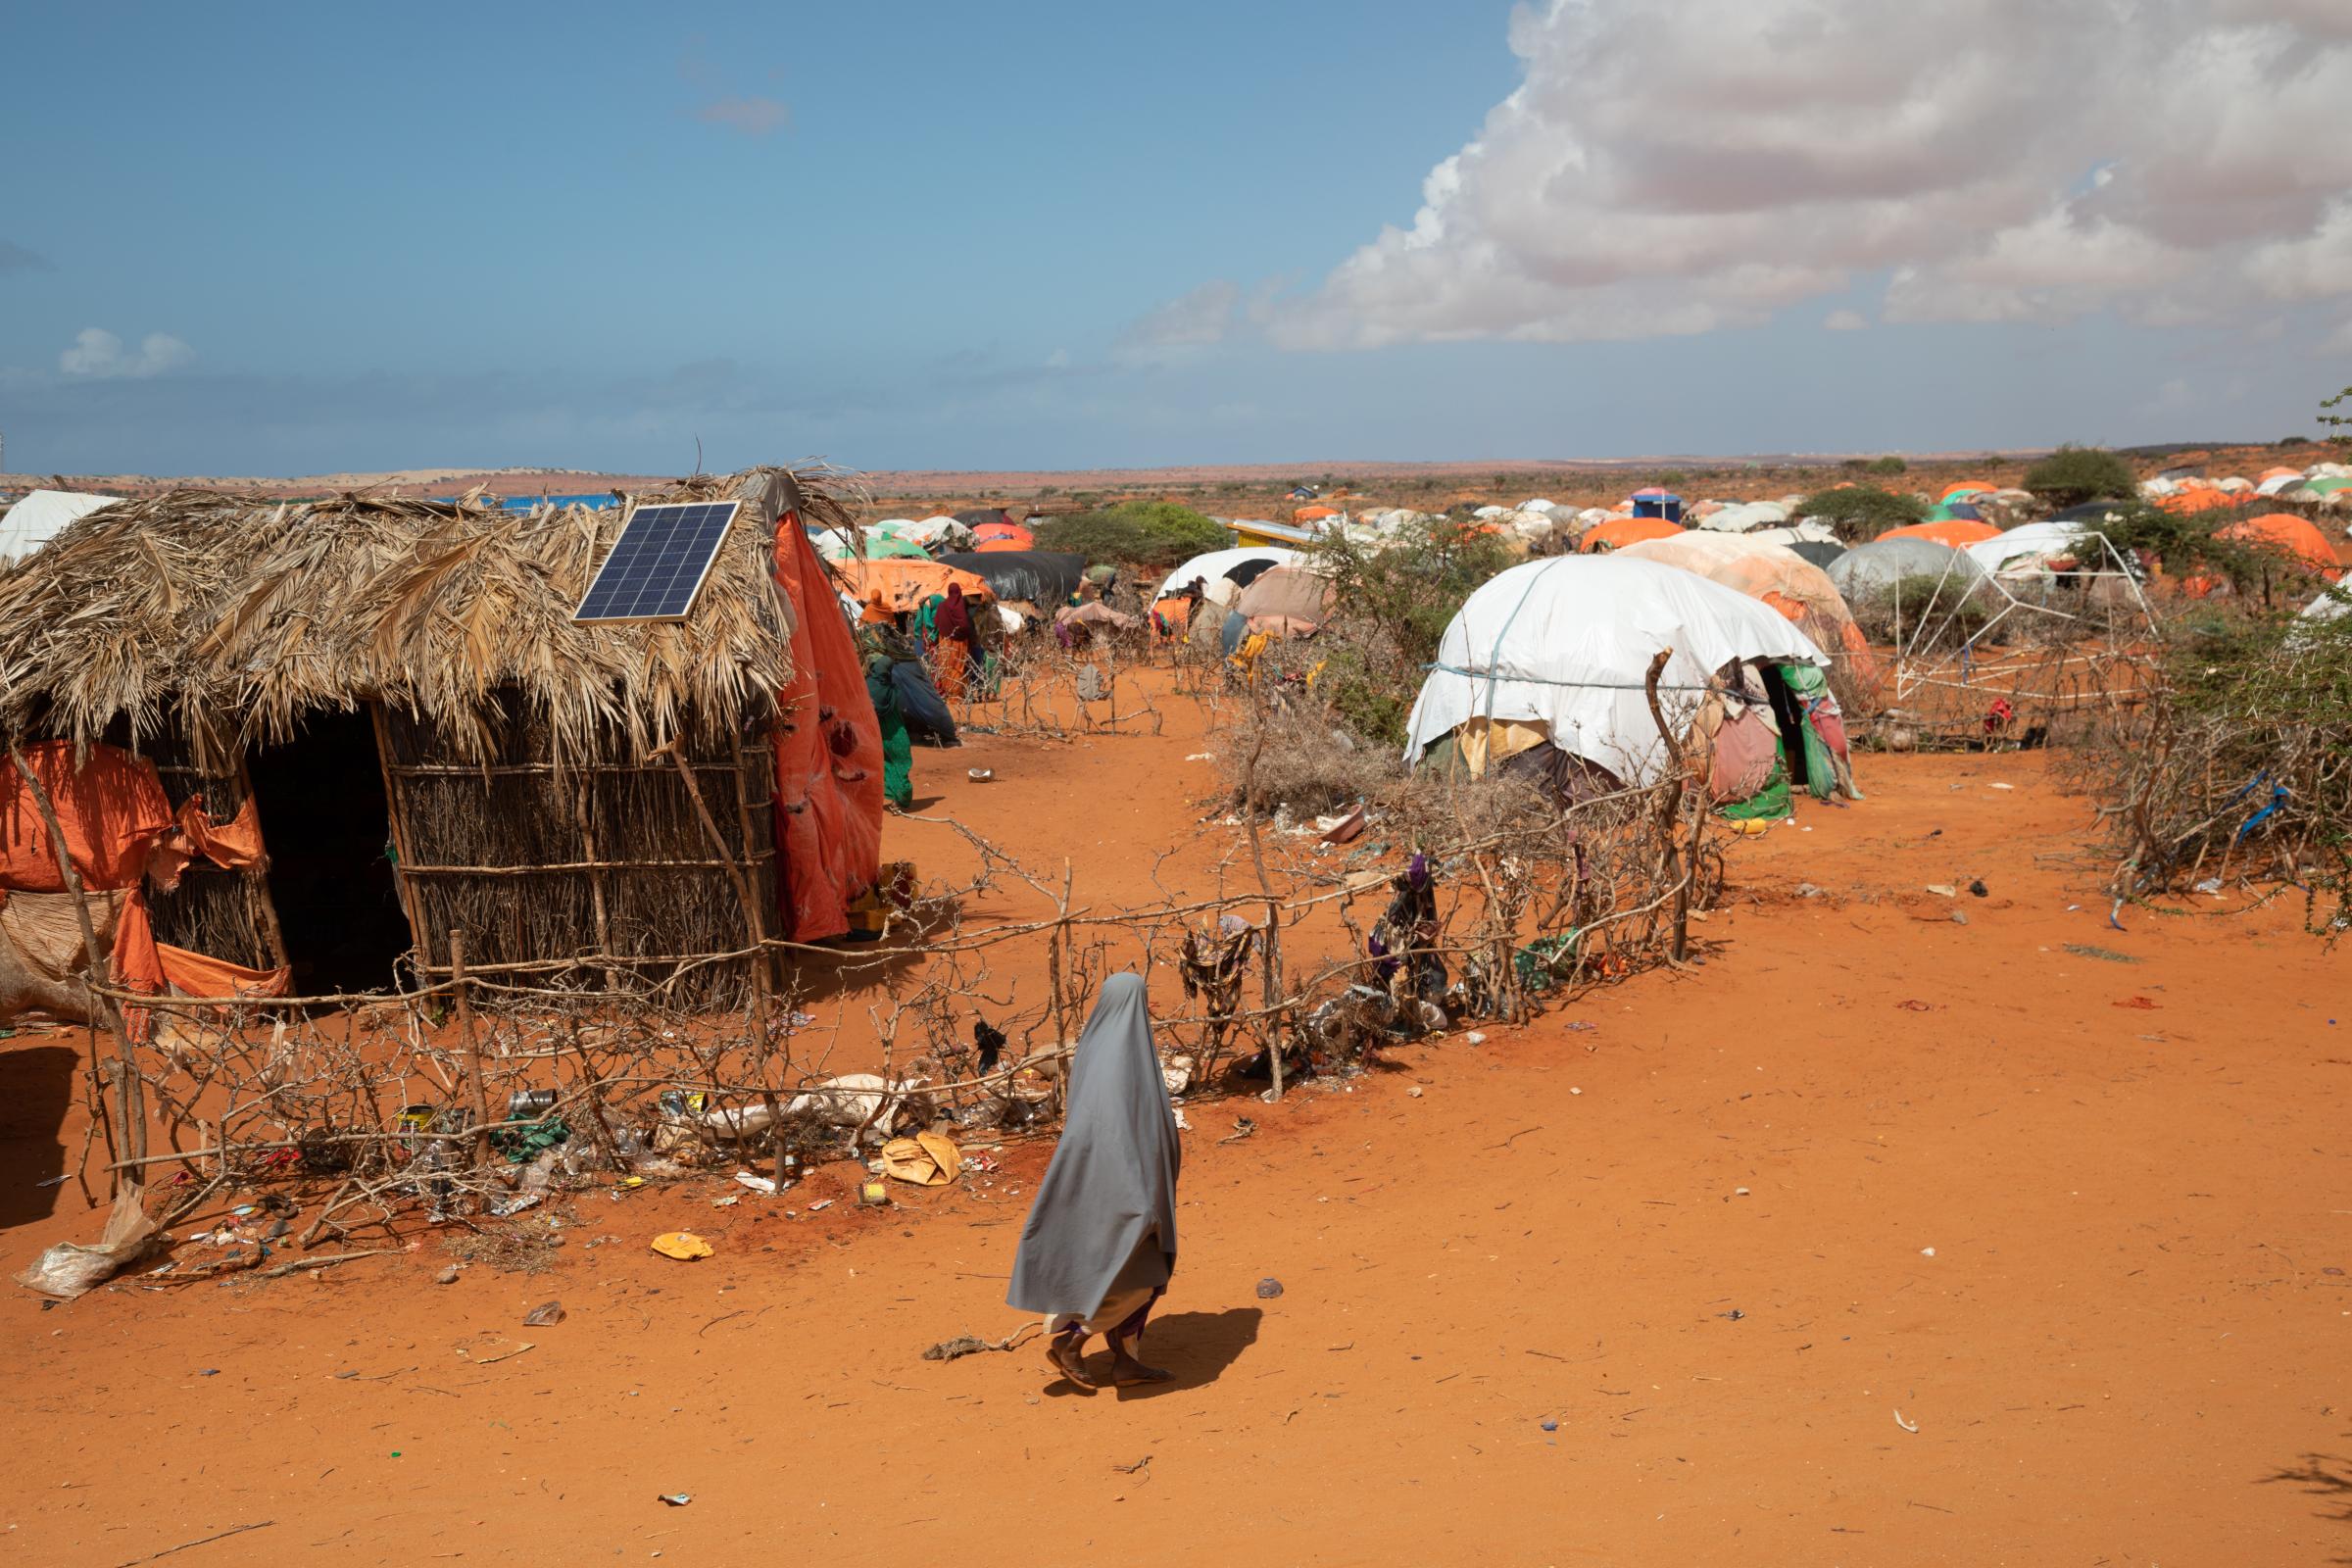 Overcoming Challenges through Healthcare Outreach in Kismayo - El Jale IDP camp, located on the outskirts of Kismayo in the lower Jubba region of Somalia,...